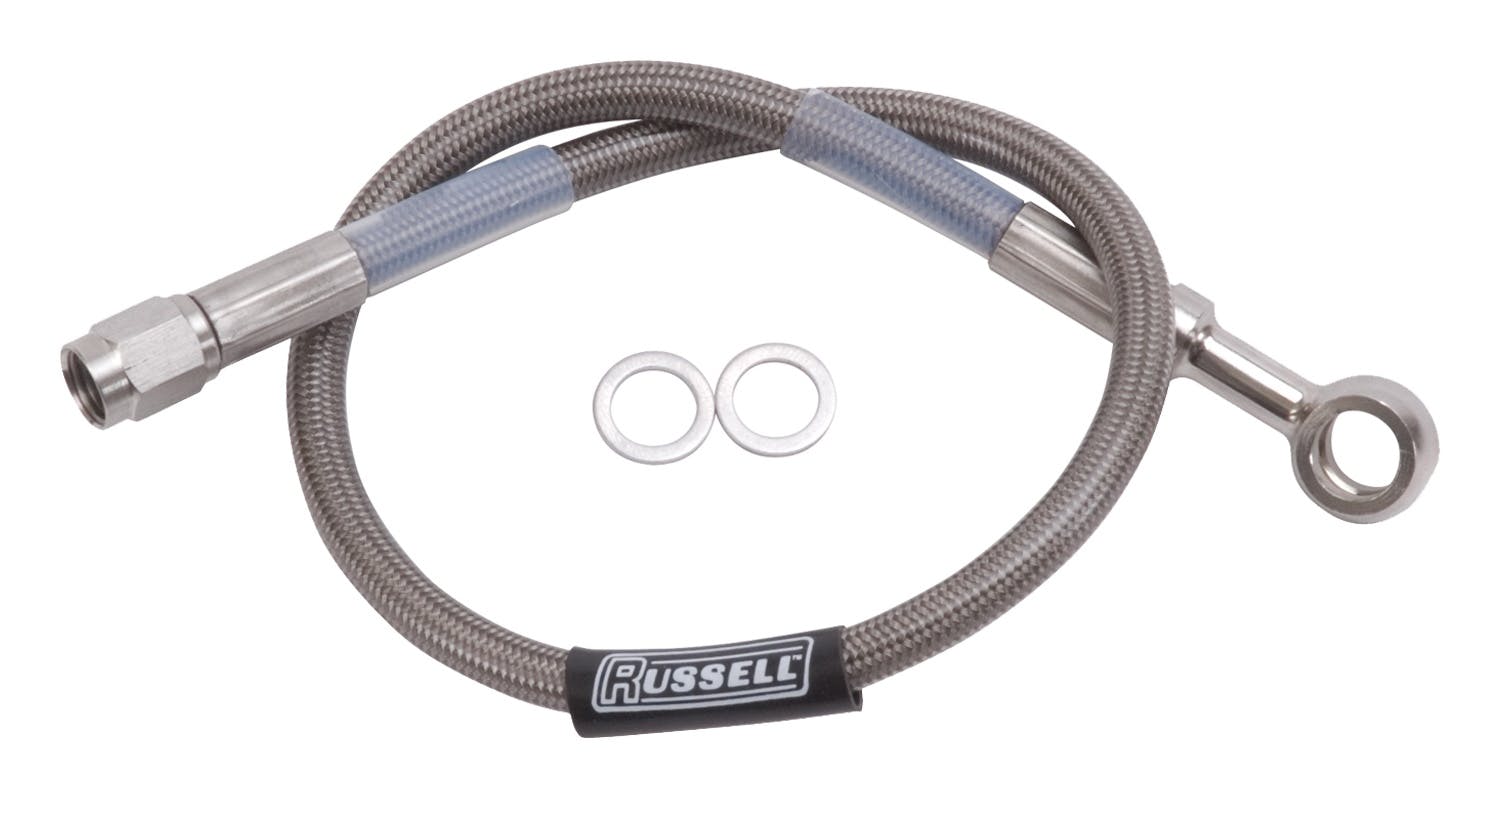 Russell 657302 Brake Line Assembly  13in 10mm -3/8in Banjo To Straight #3   Endura / Stree